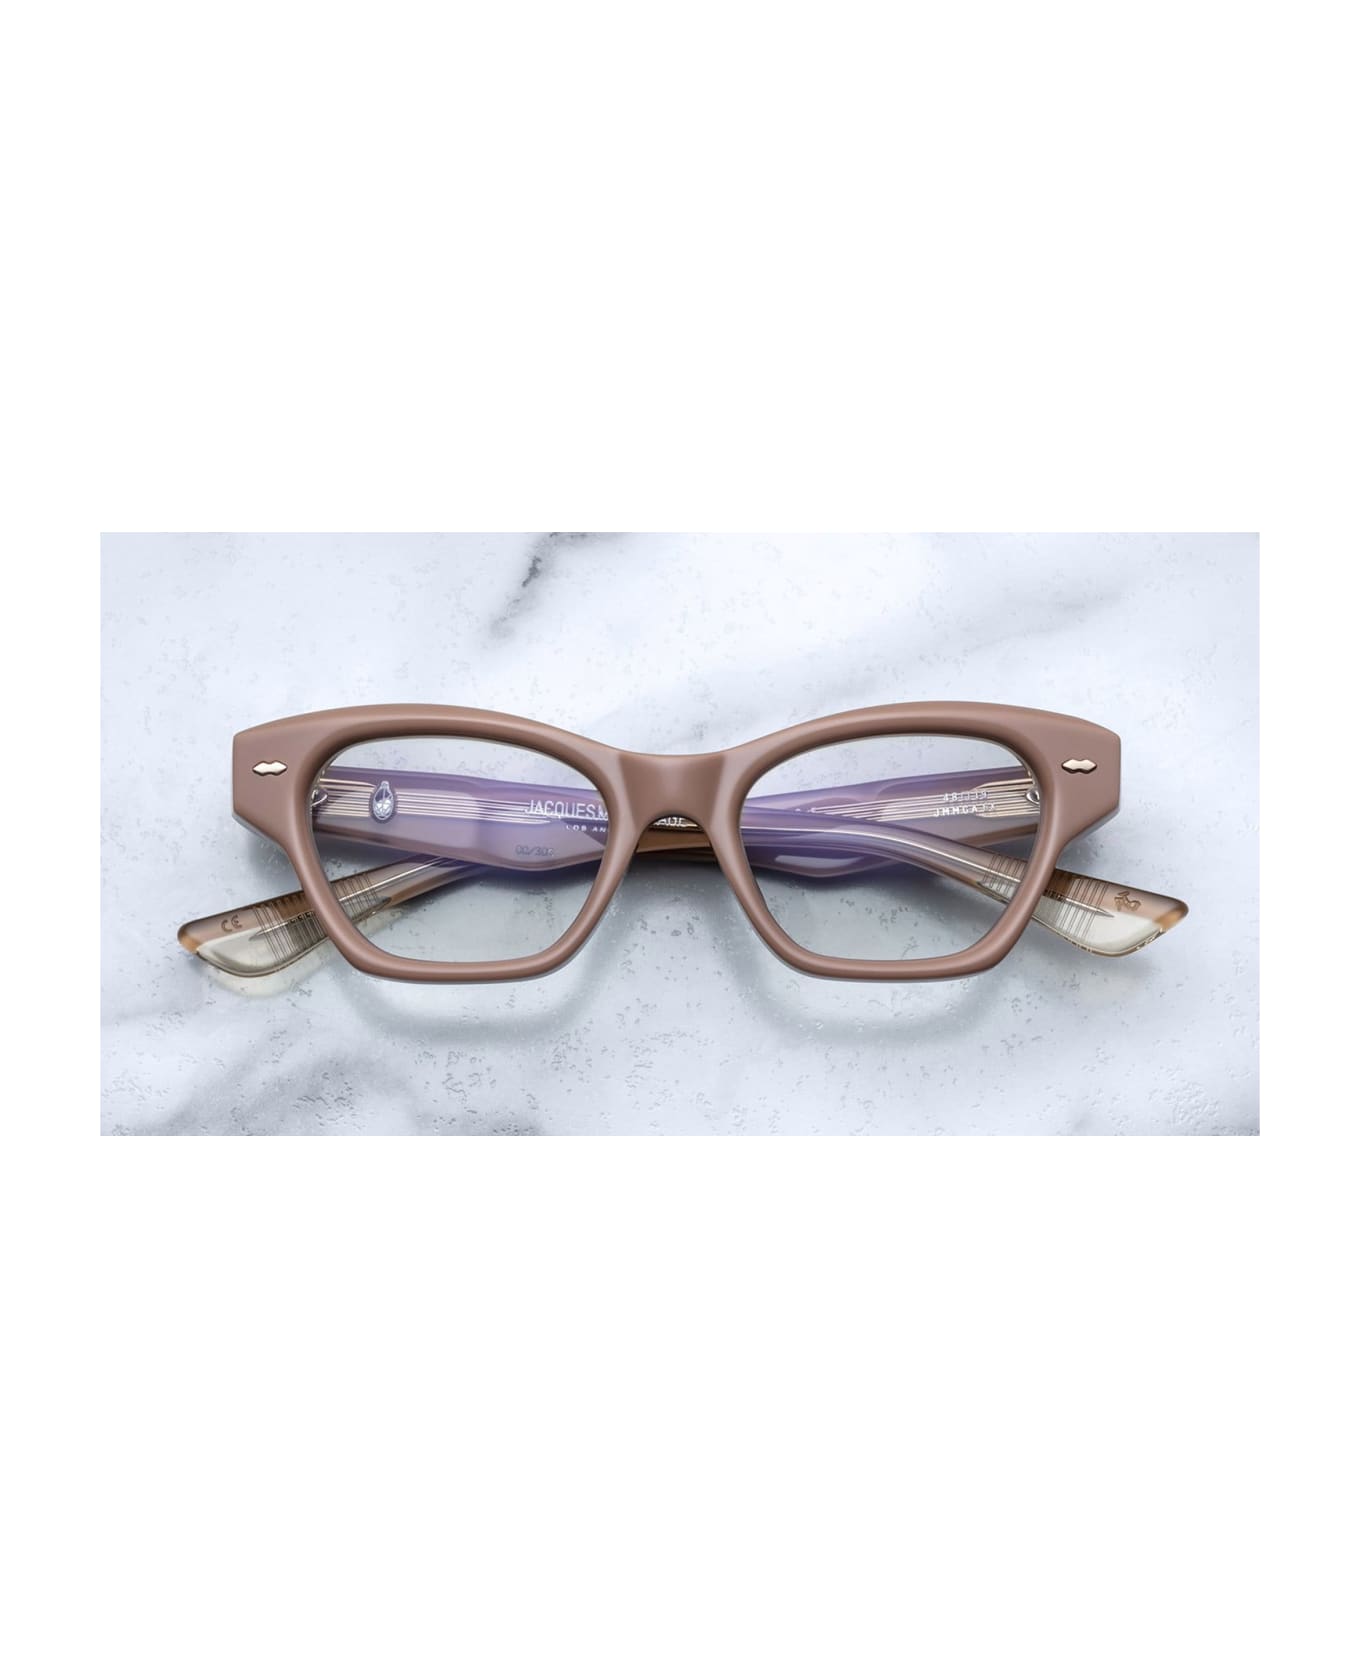 Jacques Marie Mage Grace 2 - Porter Rx Glasses - pink/gold アイウェア